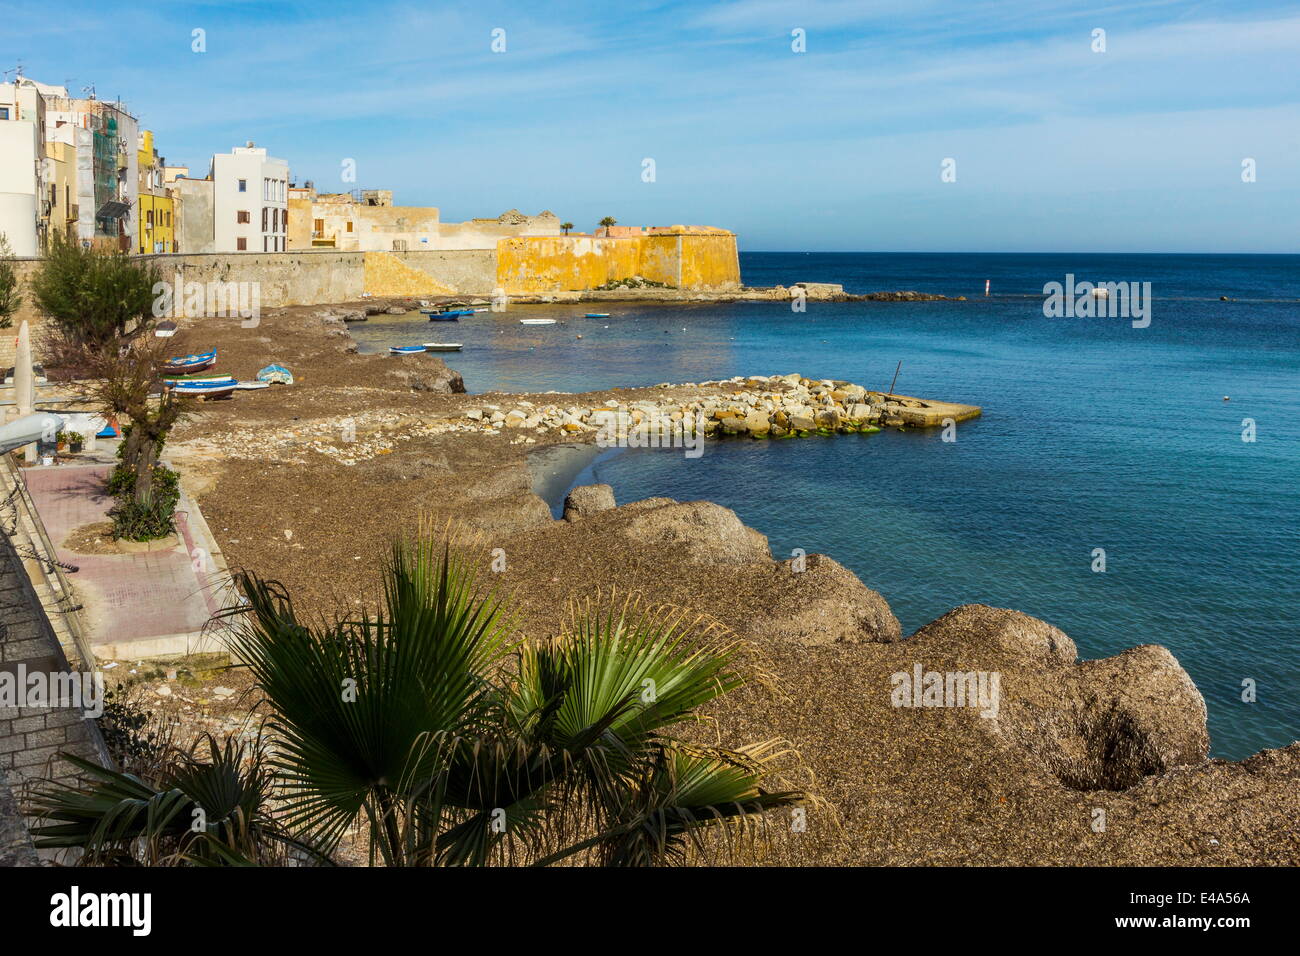 Cove and city walls seen from Via Mura Di Tramontana Ovest on sea front, Trapani, Sicily, Italy Stock Photo